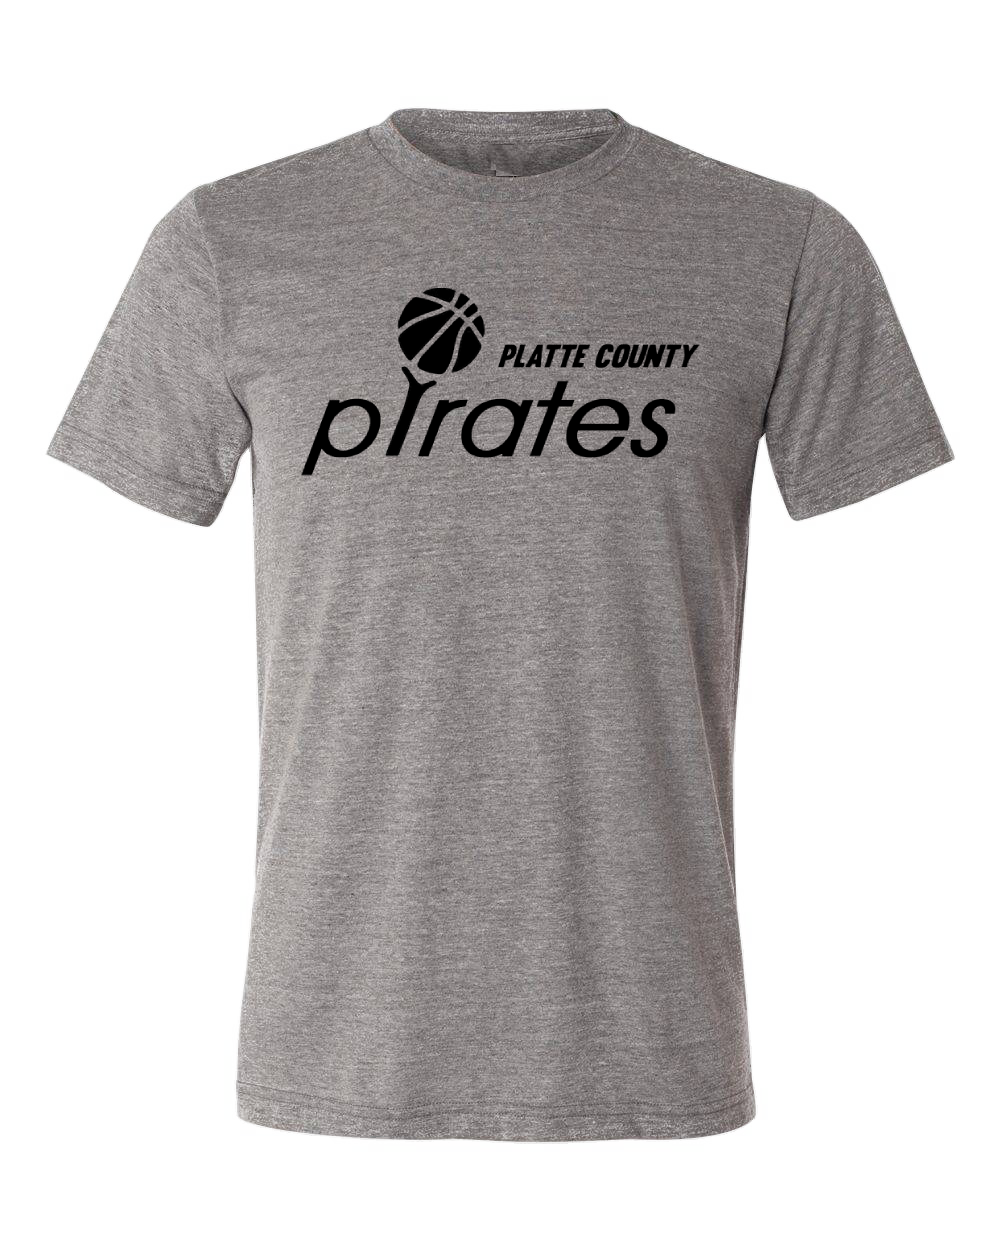 Pirate Cagers Tee (Unisex)